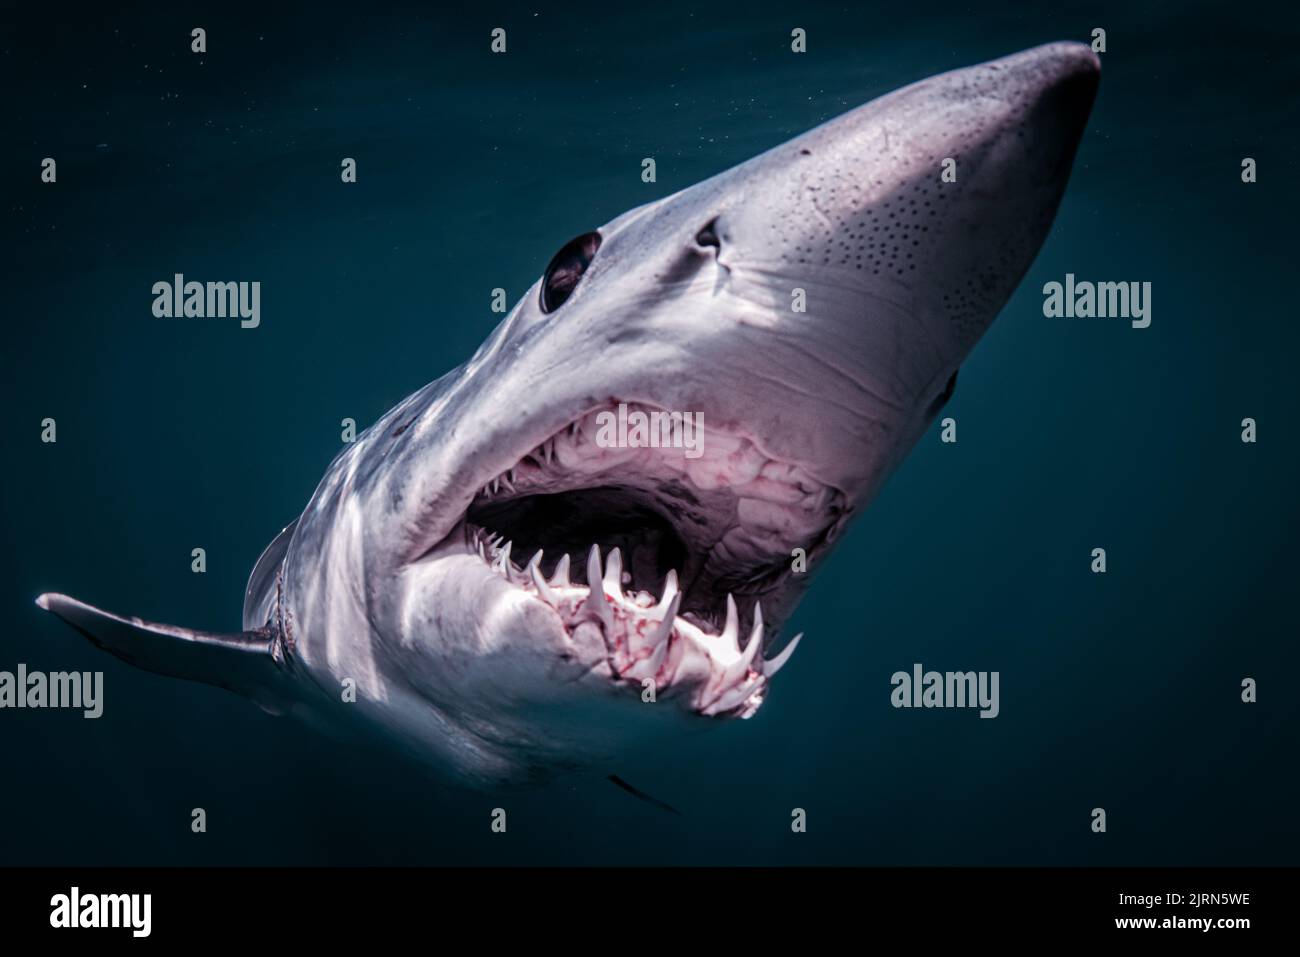 They are short finned sharks. California, US: THIS PHOTO showing a shark ripping its bloody meal to shreds would terrify most people yet these misunde Stock Photo